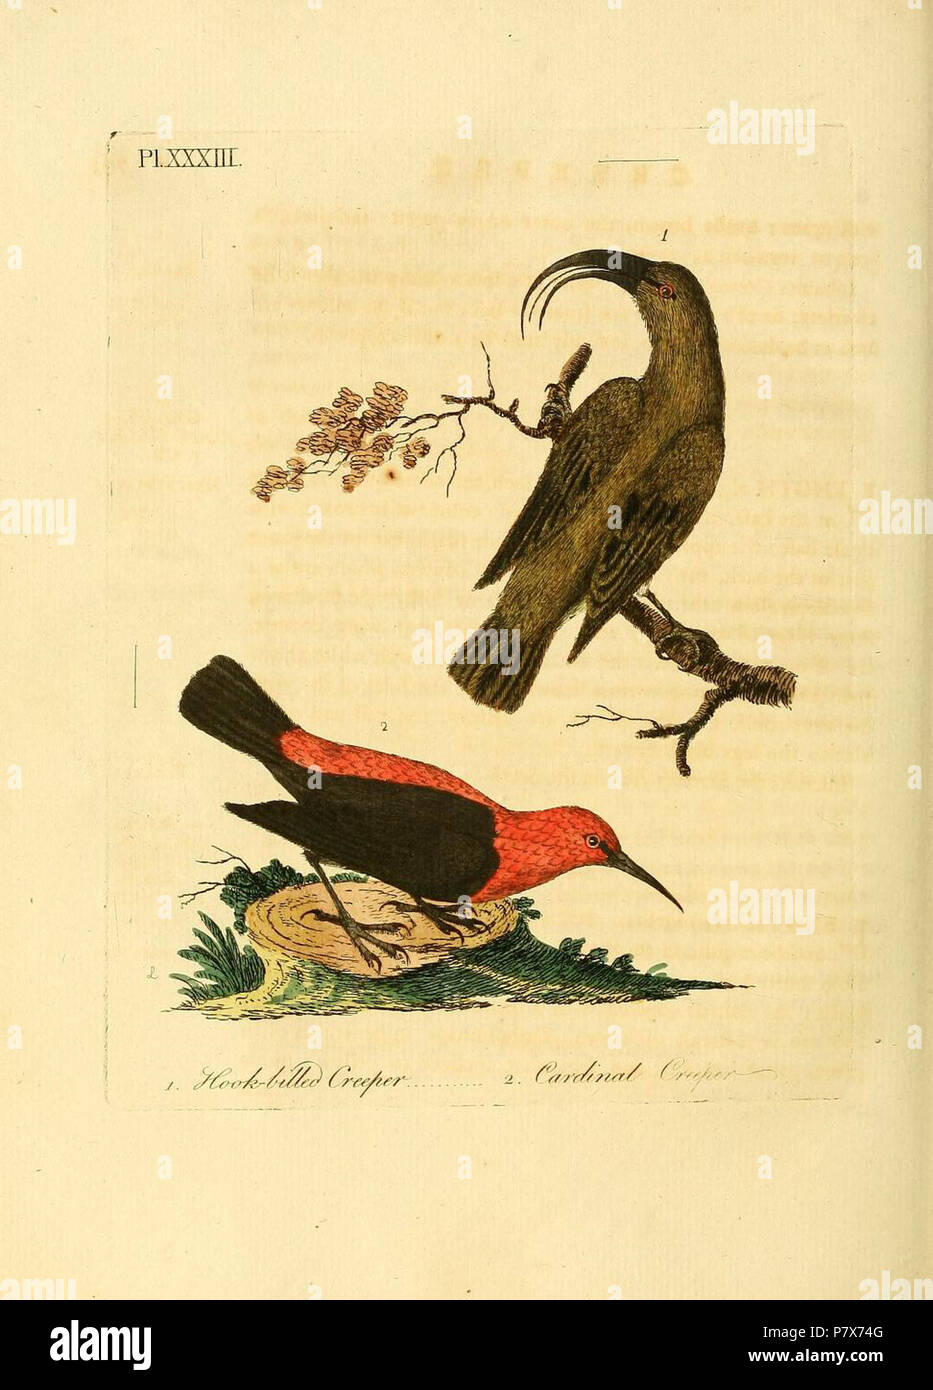 English: Plate XXXIII from Latham's A general synopsis of birds fig. 1 - Hook-billed green Creeper = Hemignathus obscurus fig. 2 - Cardinal Creeper = Myzomela cardinalis . 27 April 2017 170 General Synopsis Of Birds Latham 1782 plate 33 Stock Photo